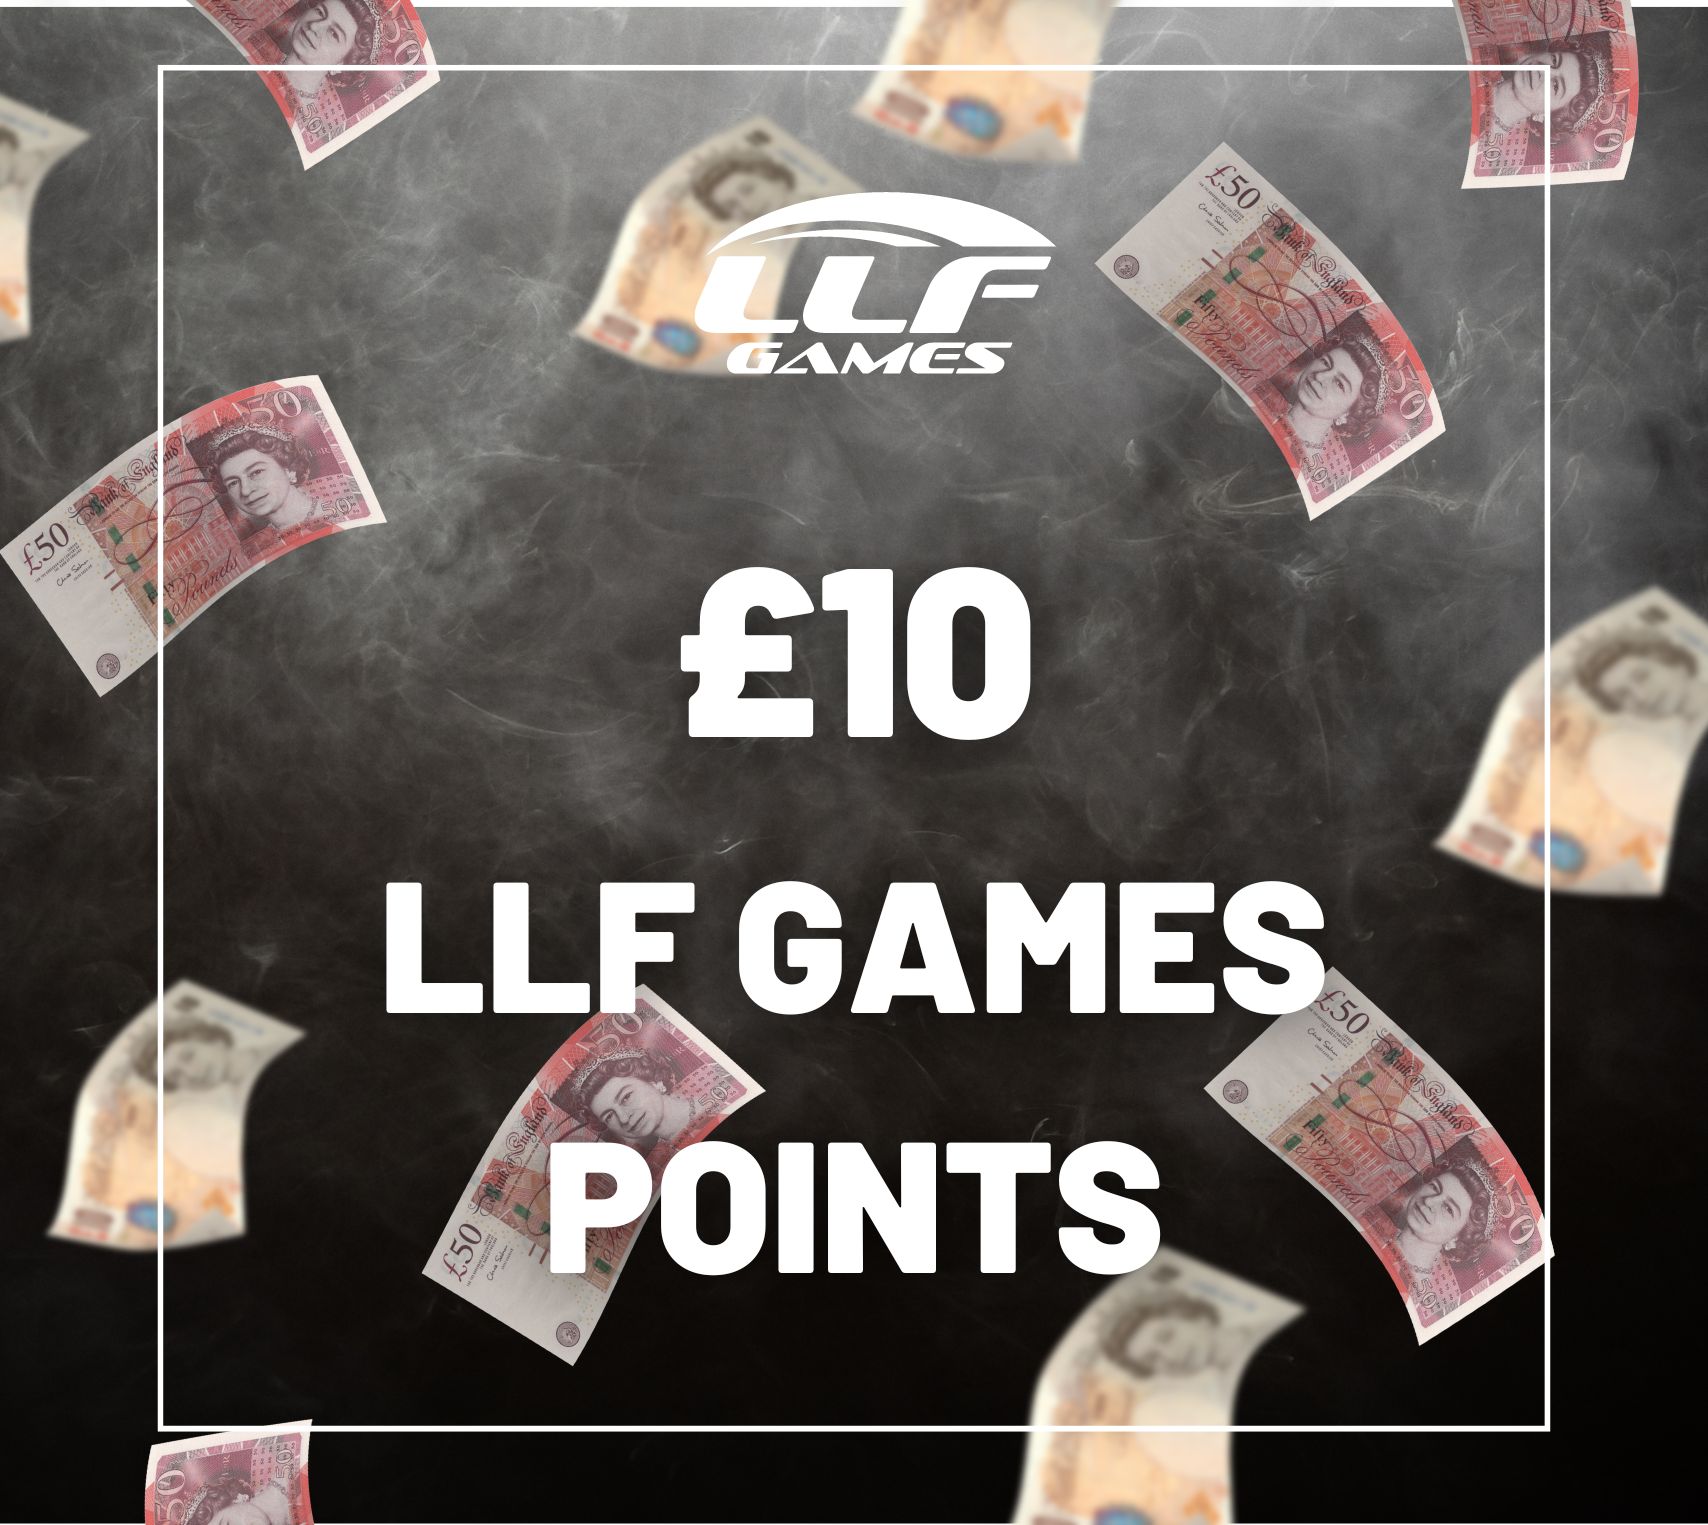 £10 LLF Games Points (Site Credit)